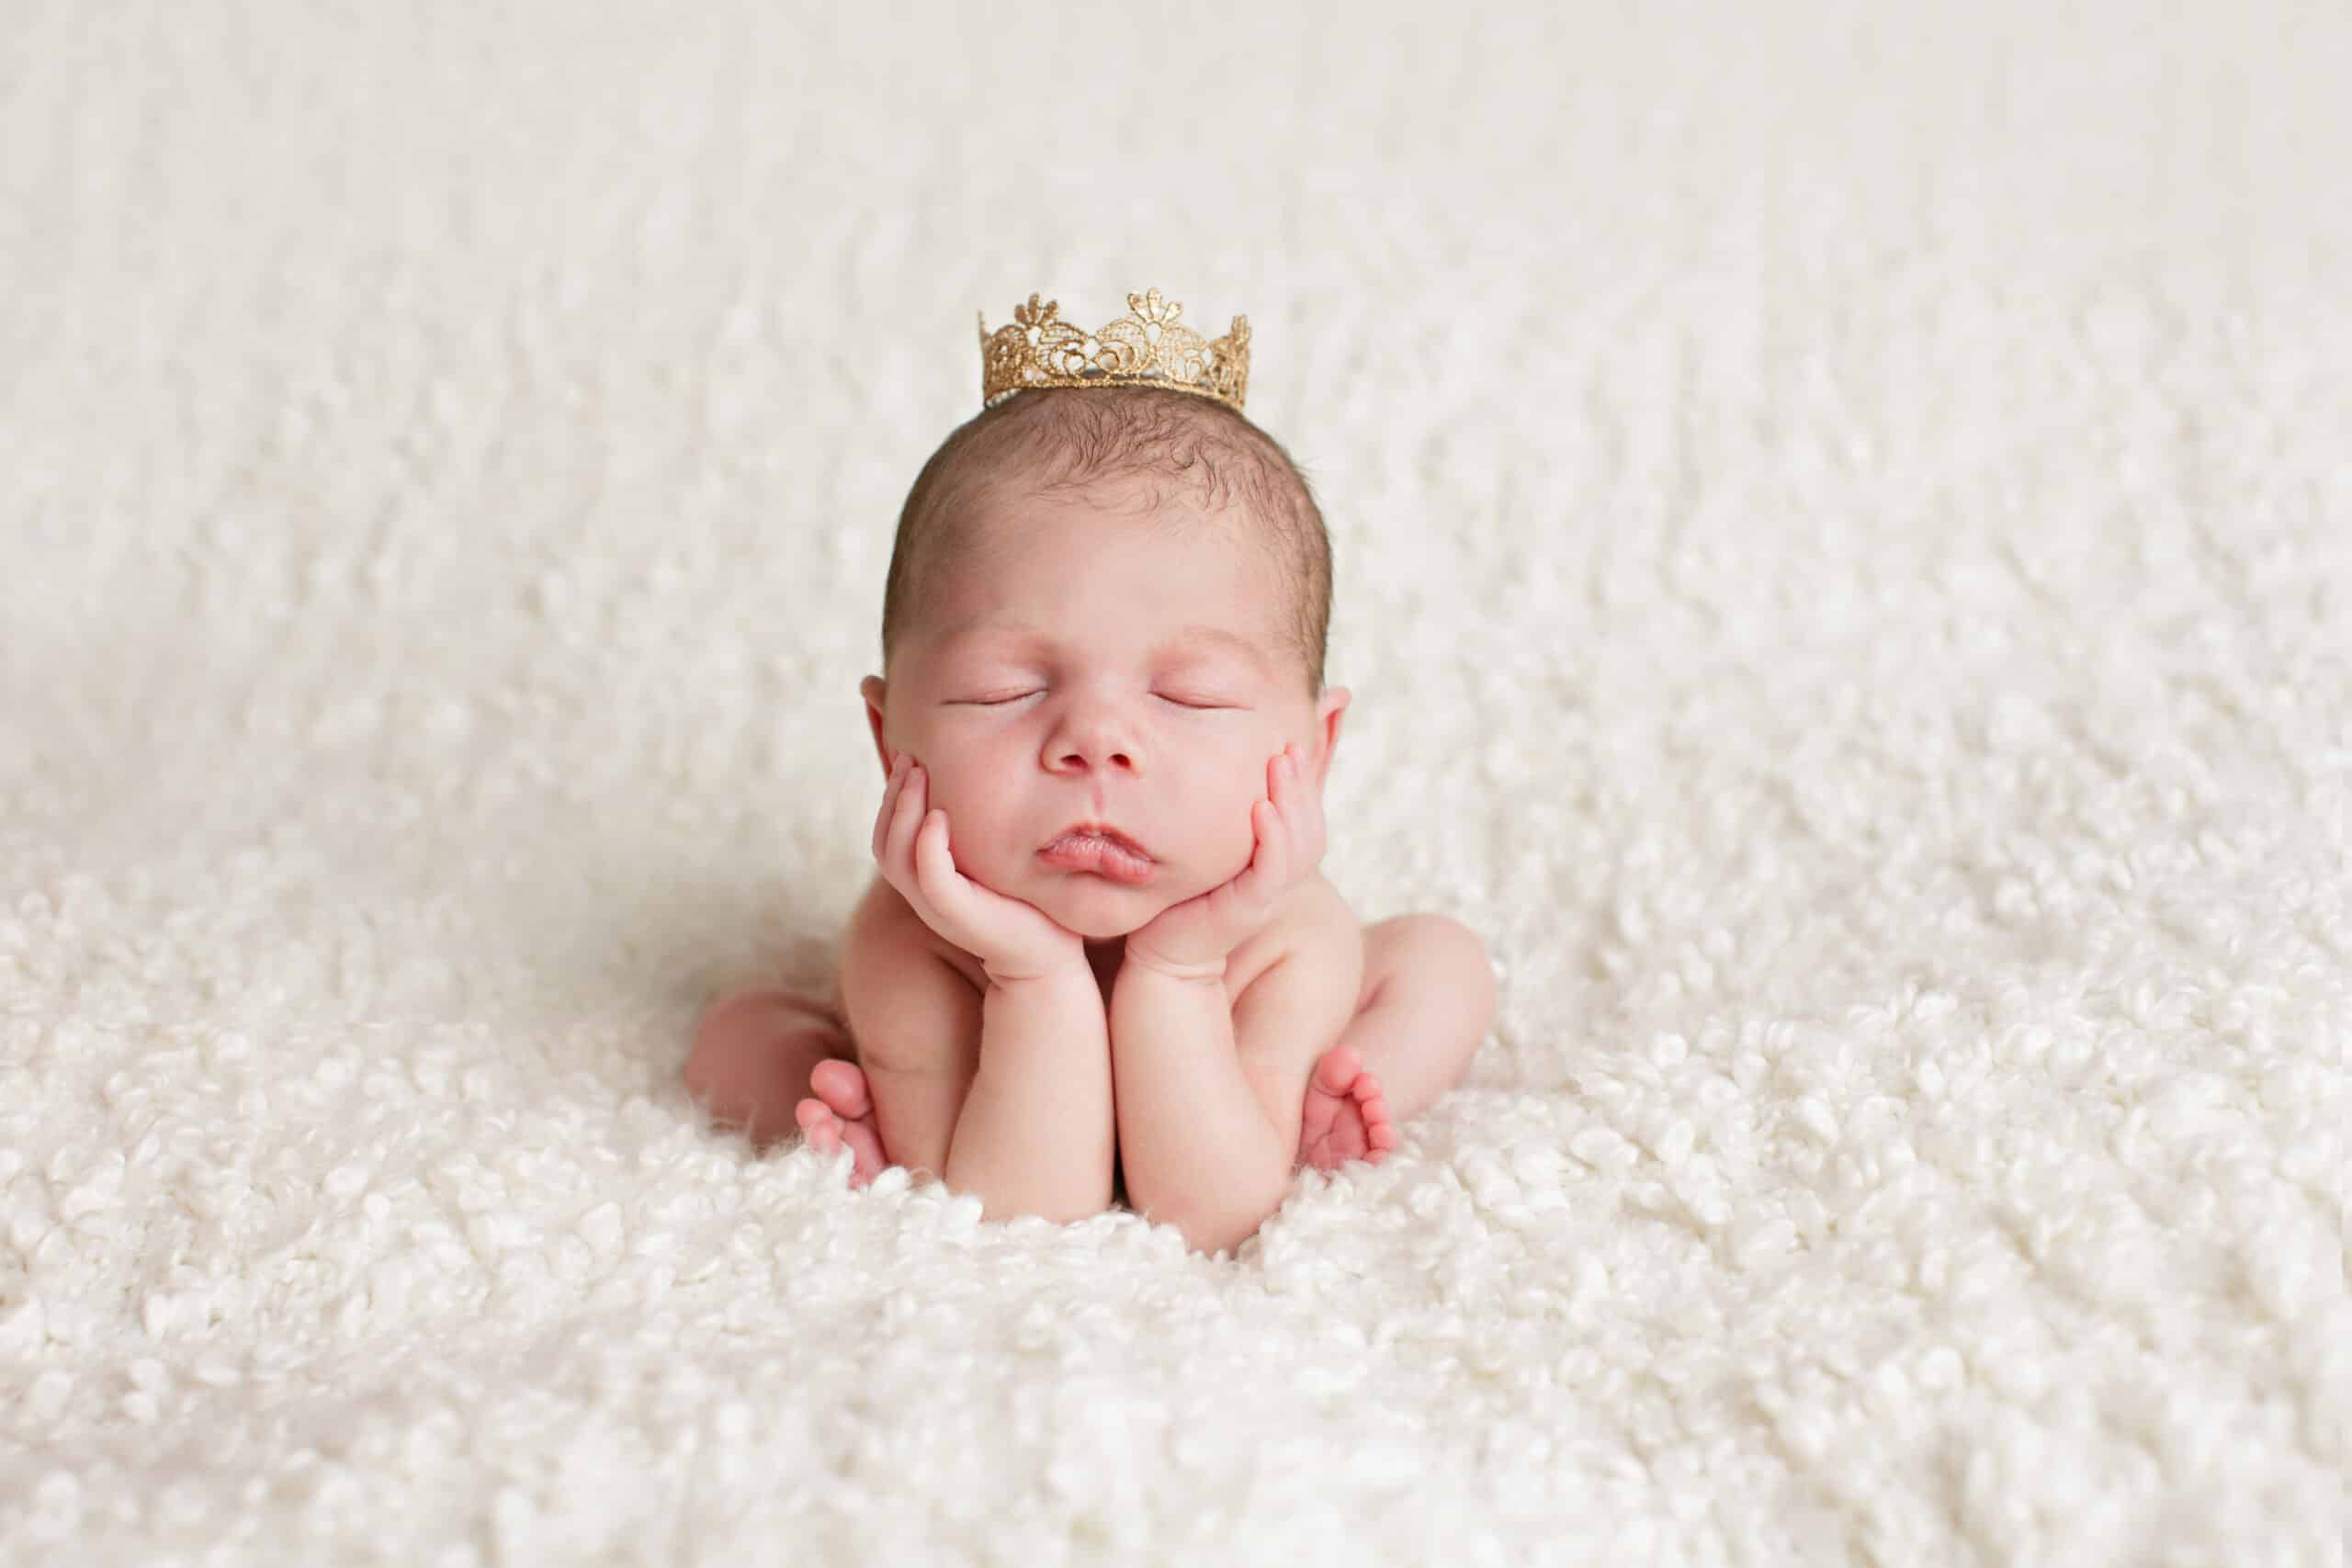 A newborn baby sits on a white blanket held up by its hands and elbows while wearing a gold crown